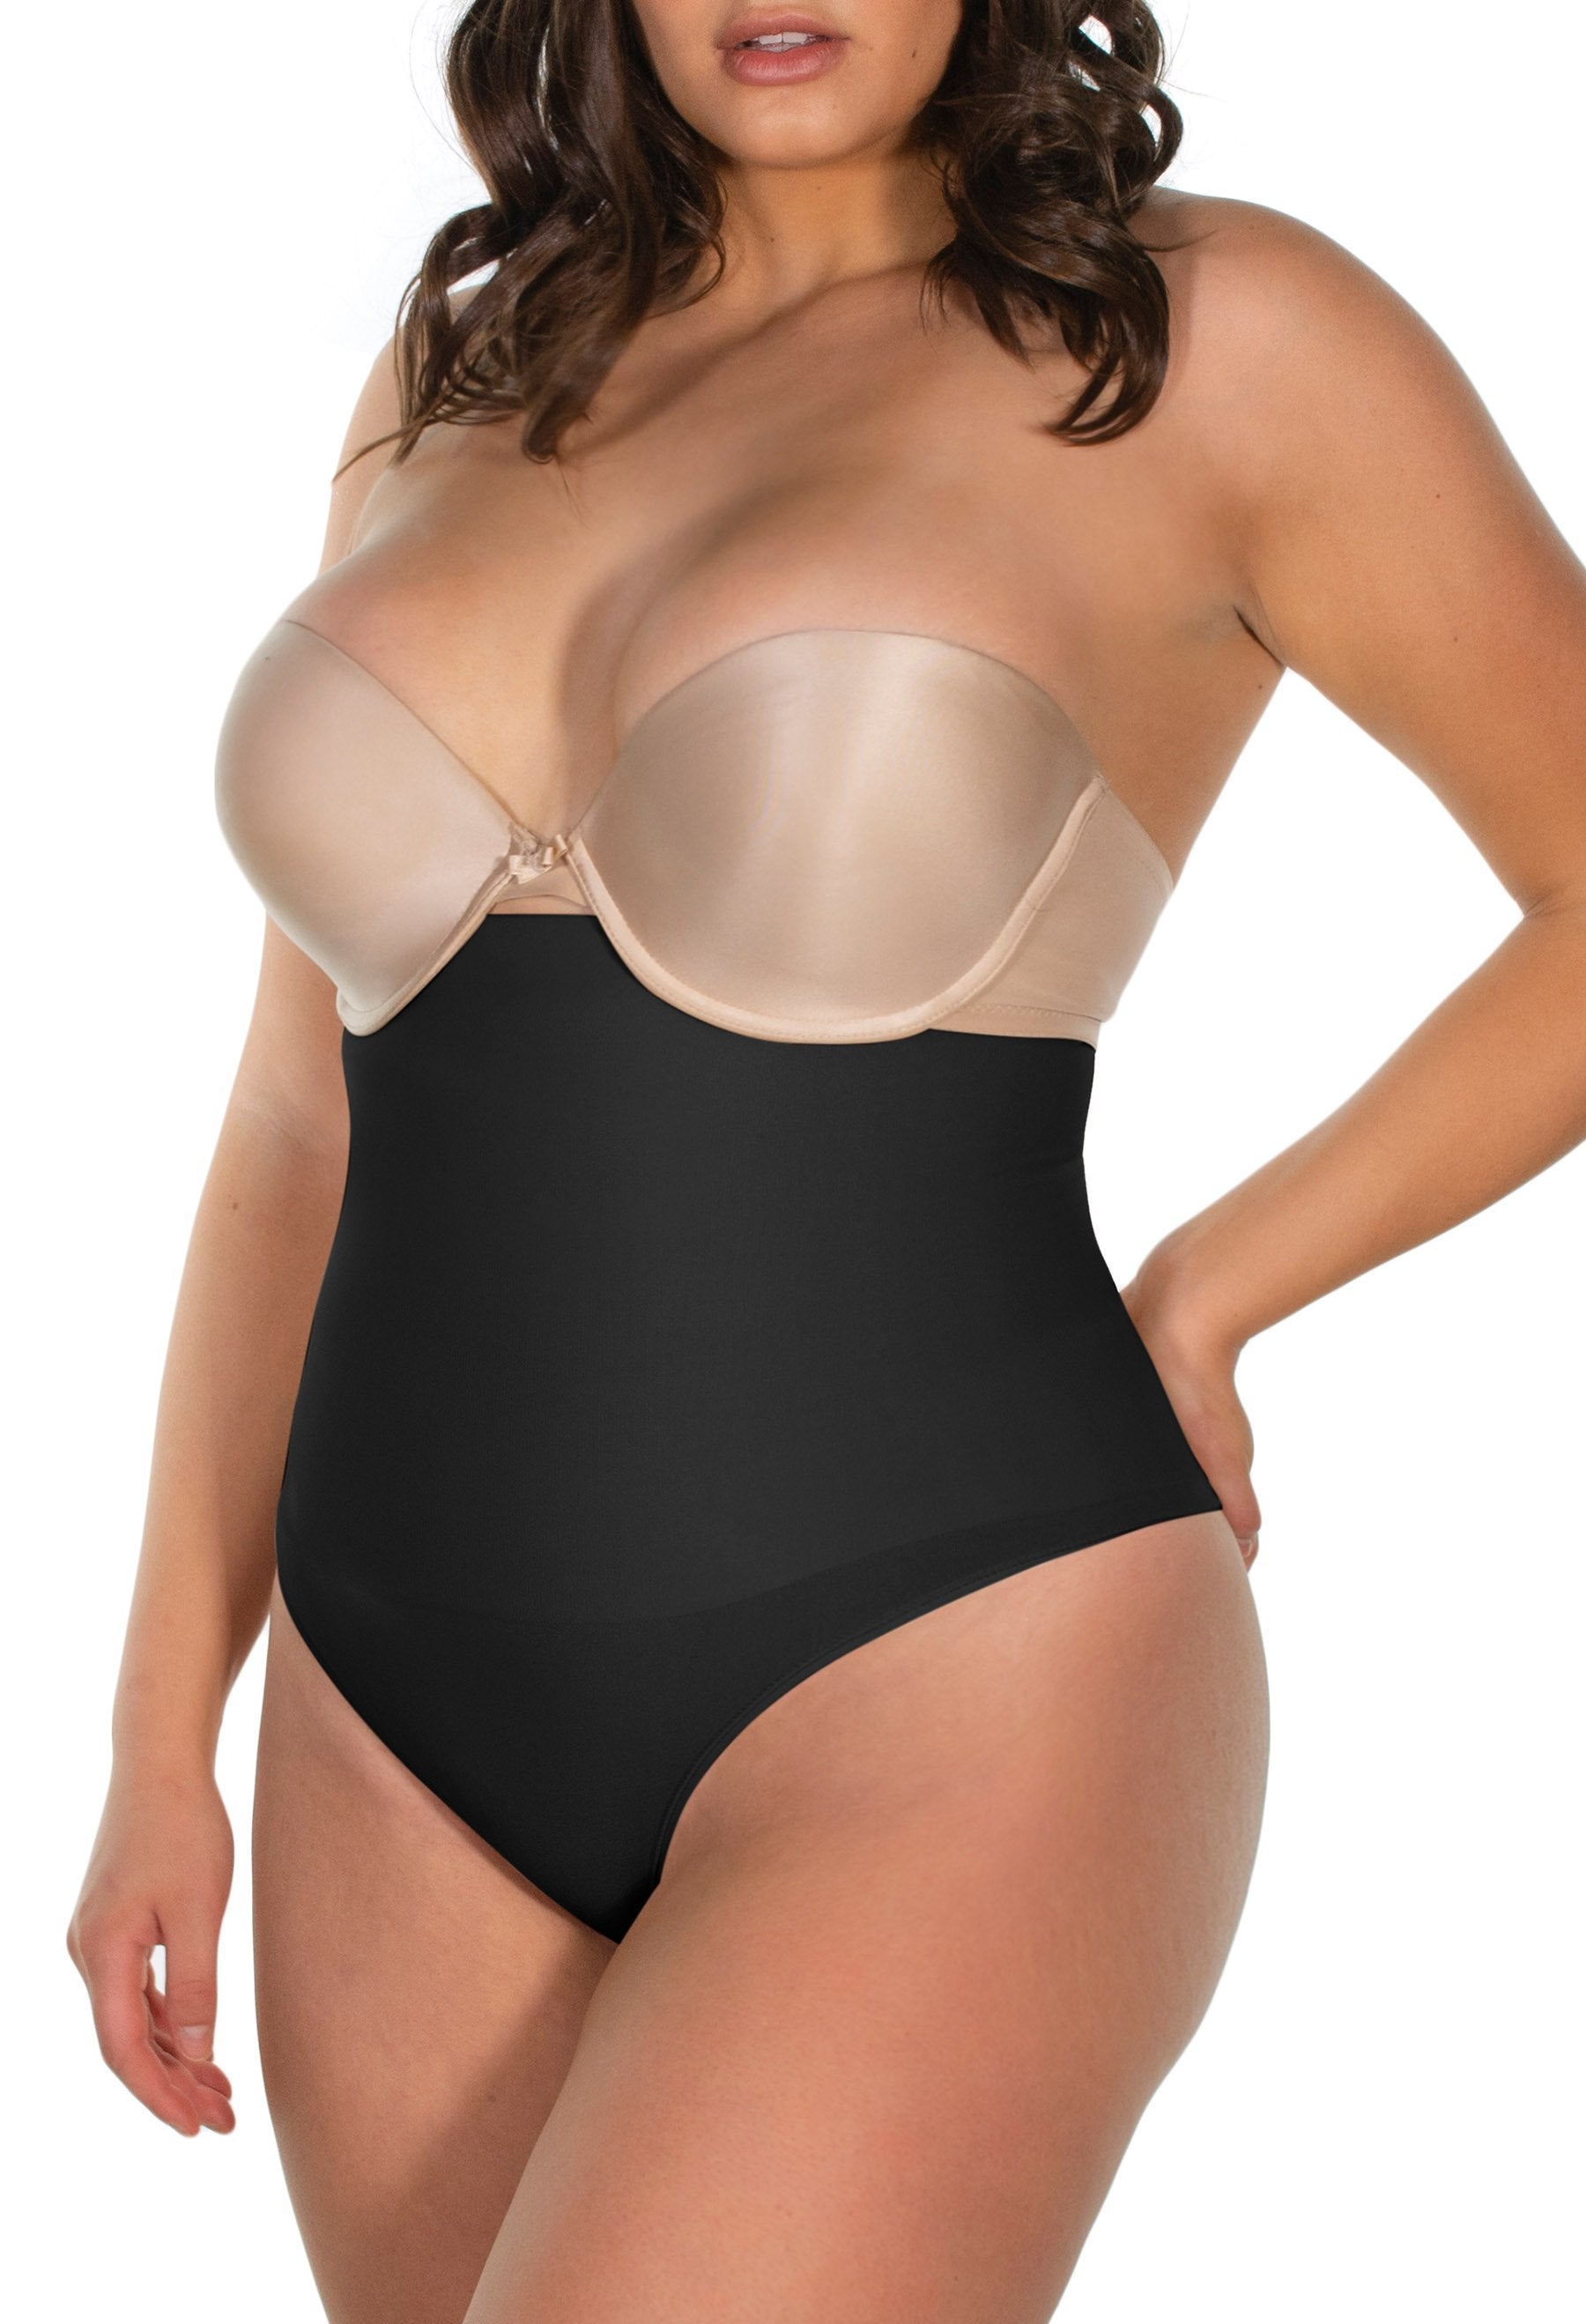 What is Wholesale Essential Plus Size Strapless Thong Shapewear